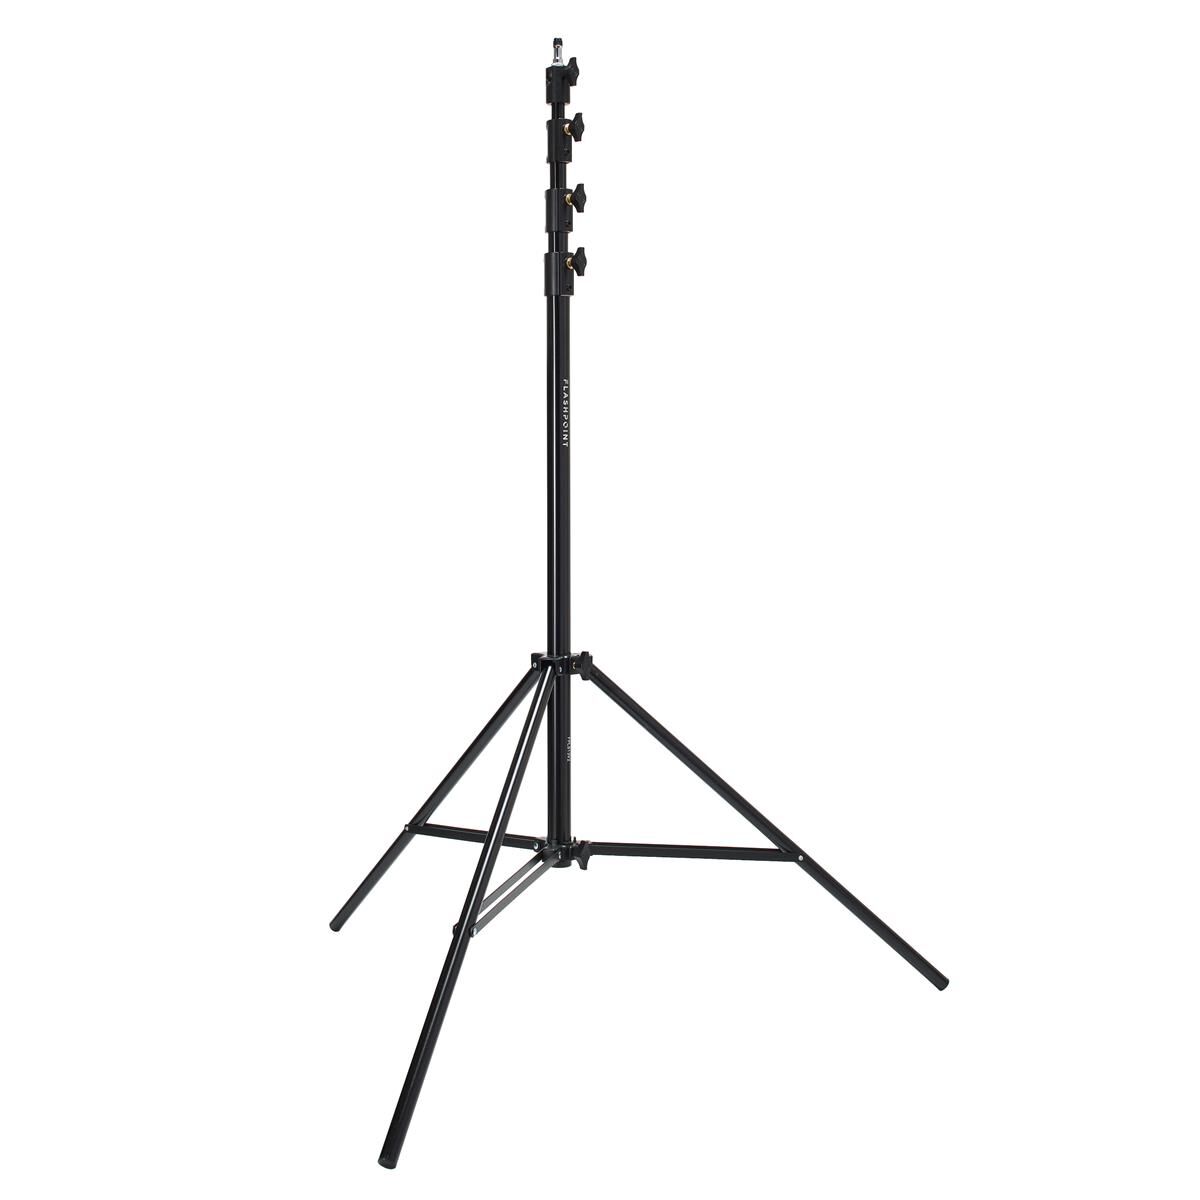 Flashpoint 13' Pro Air Cushioned Heavy Duty Light Stand V2, Black